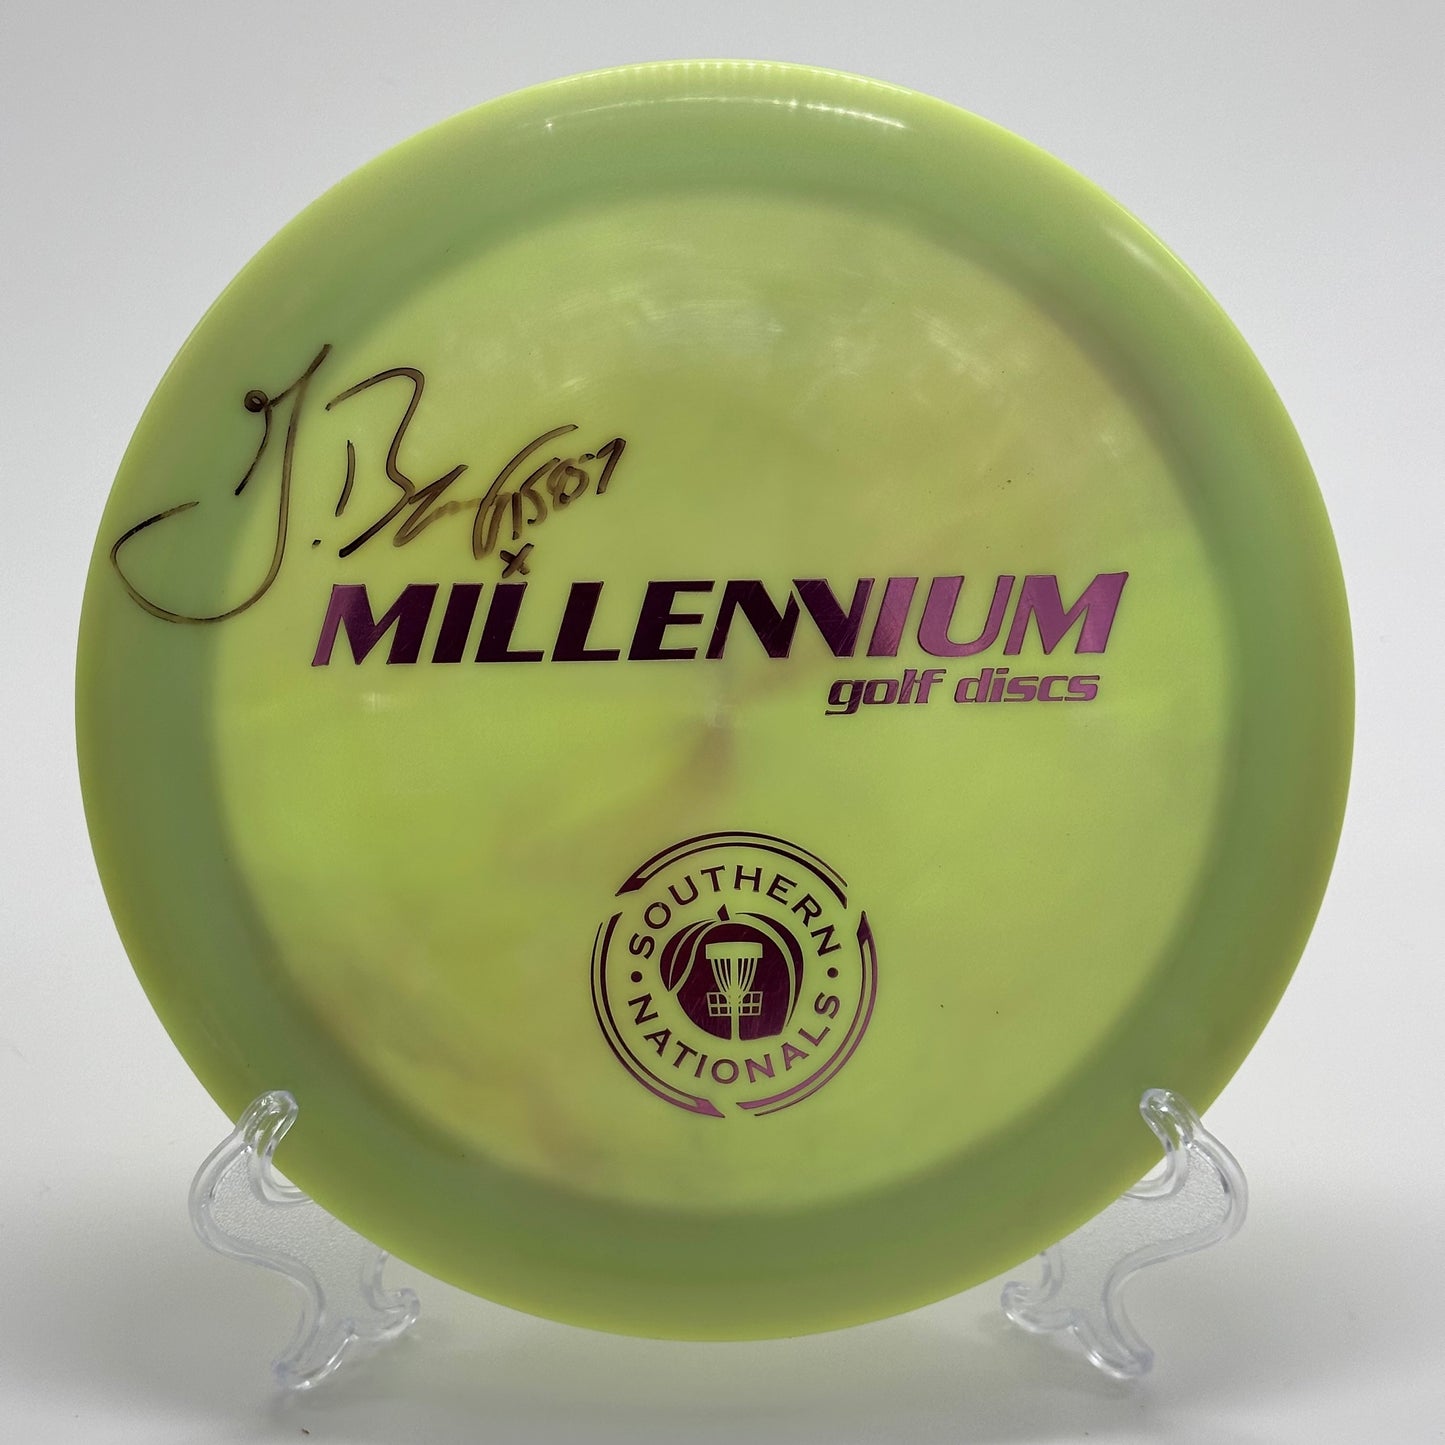 Millennium Scorpius | Swirly Sirius 1.10 LE Southern Nationals Signed Gregg Barsby